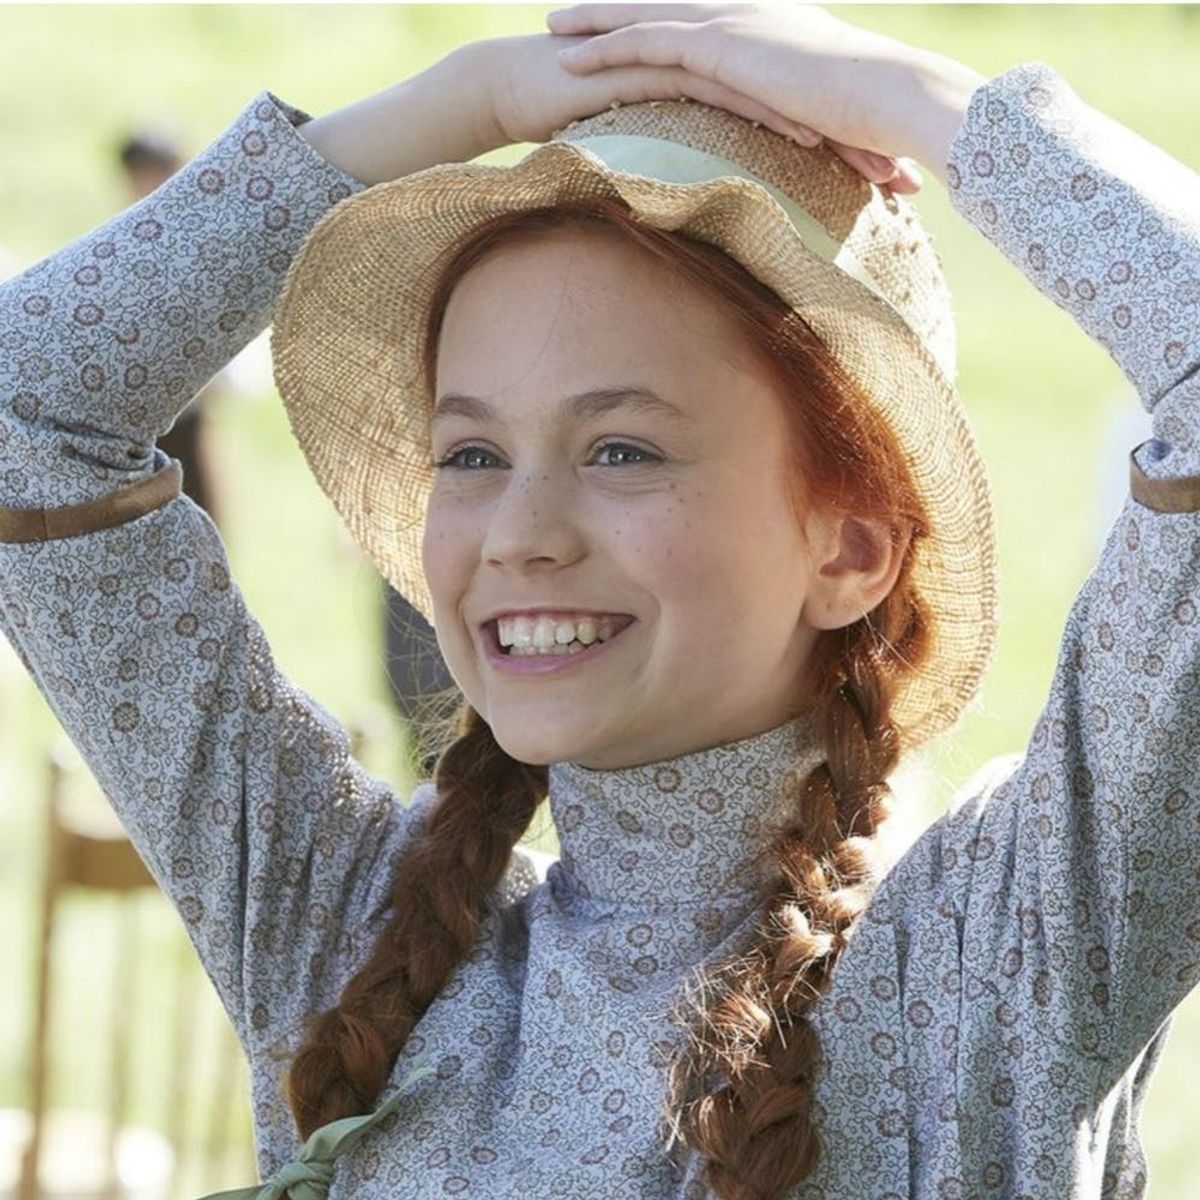 A New Anne of Green Gables Movie Is Coming and Here’s When You Can Watch It